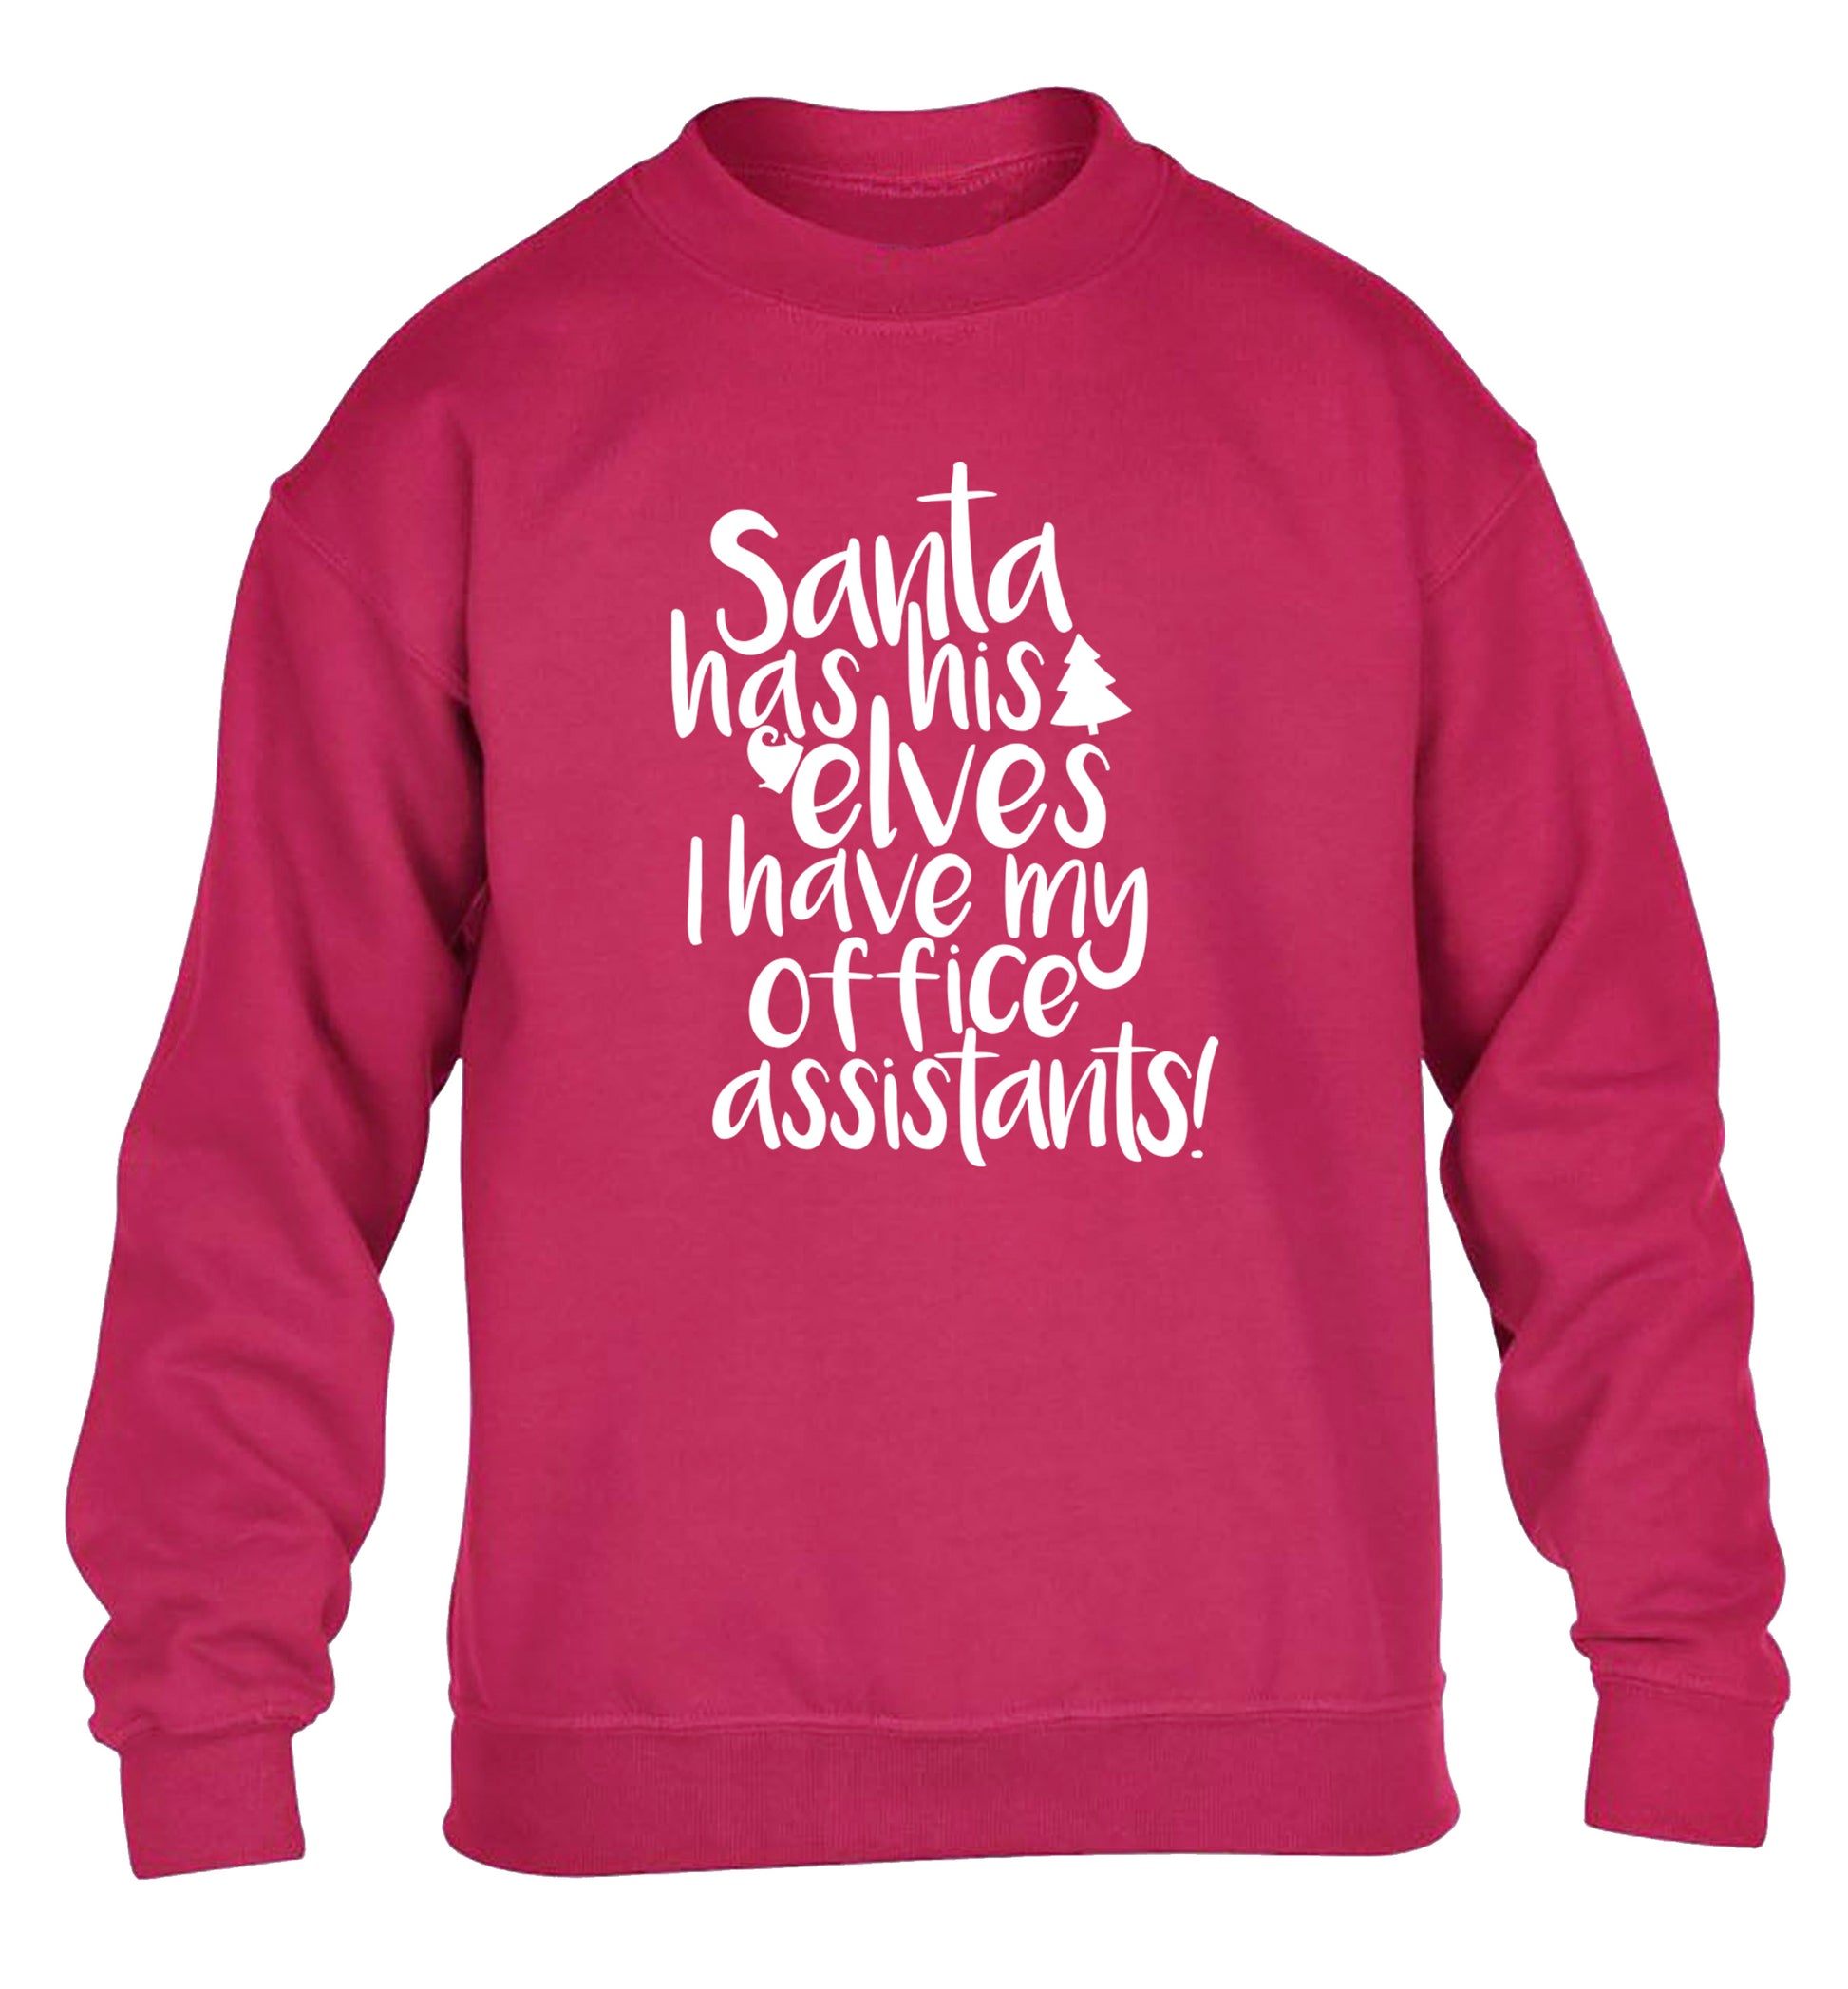 Santa has his elves I have my office assistants children's pink sweater 12-14 Years